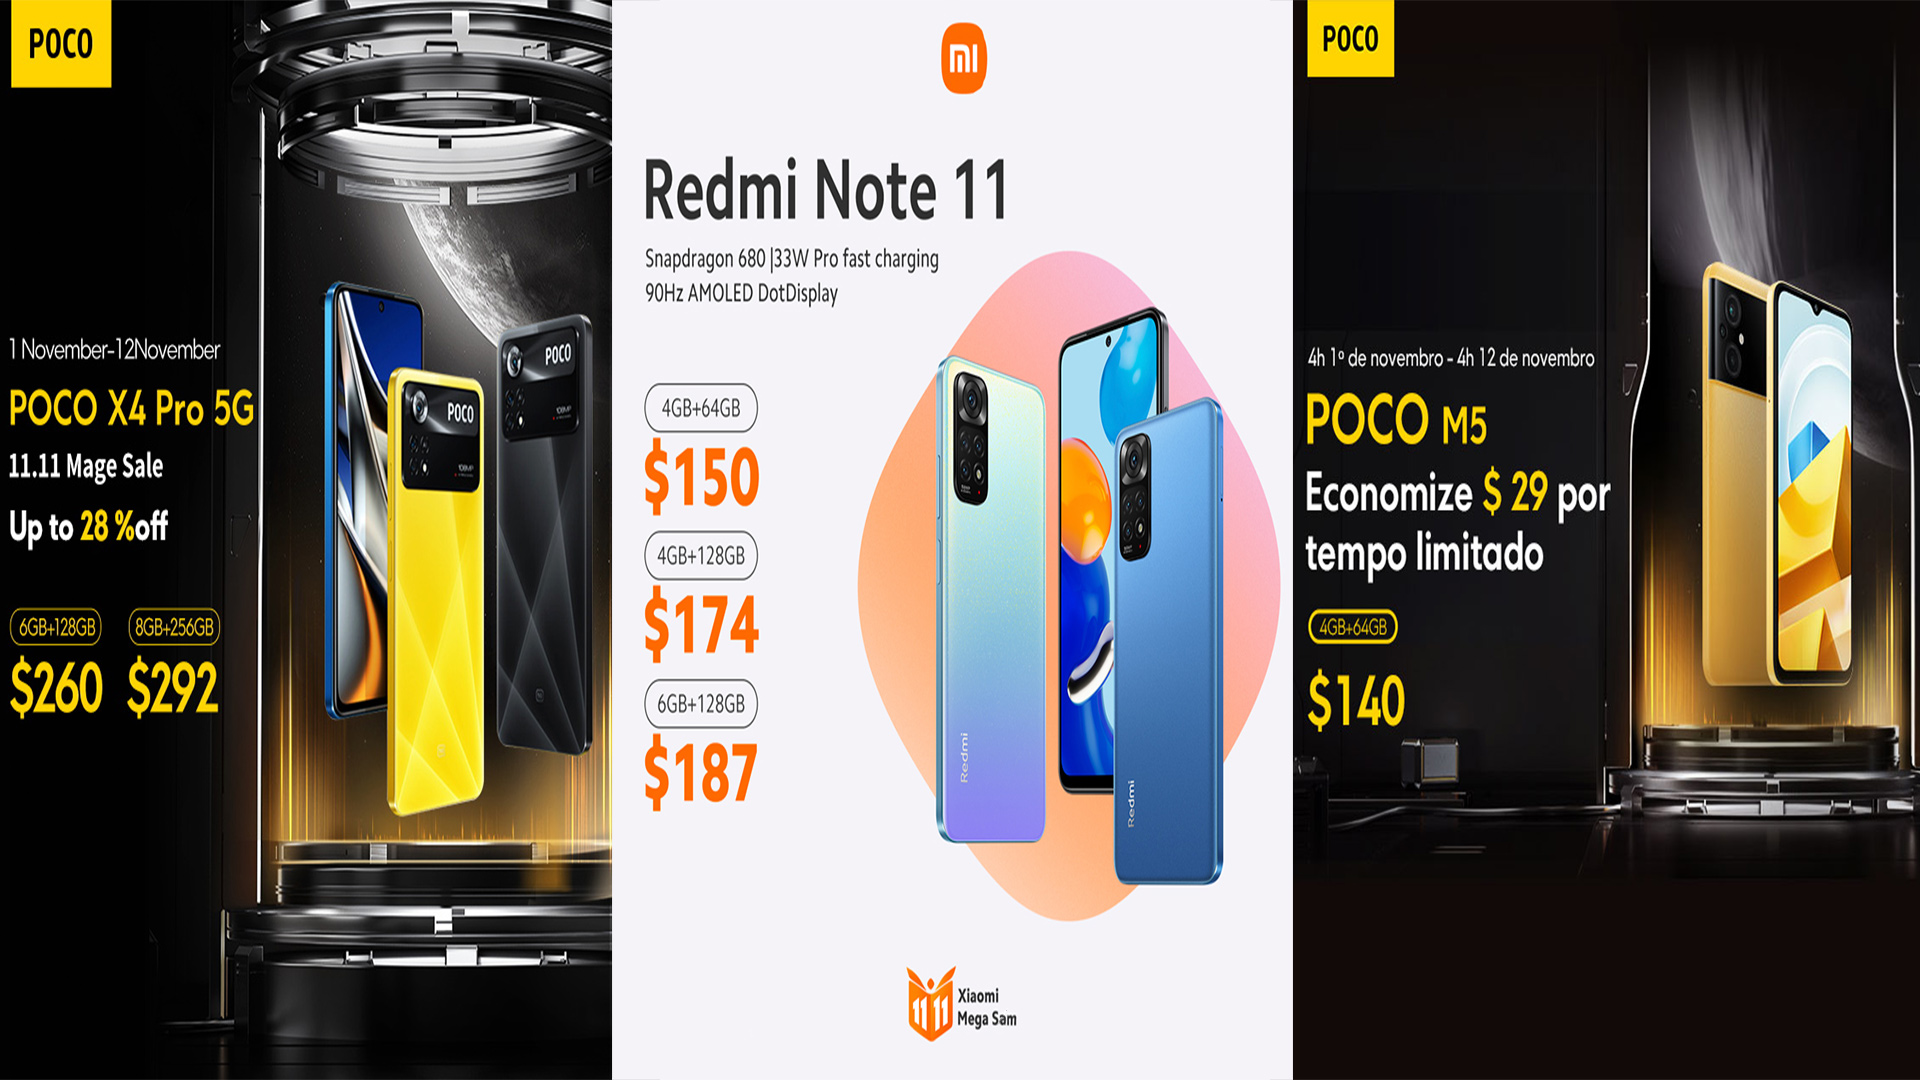 Aliexpress 11.11 Shopping Festival - The best time to buy Xiaomi and POCO products